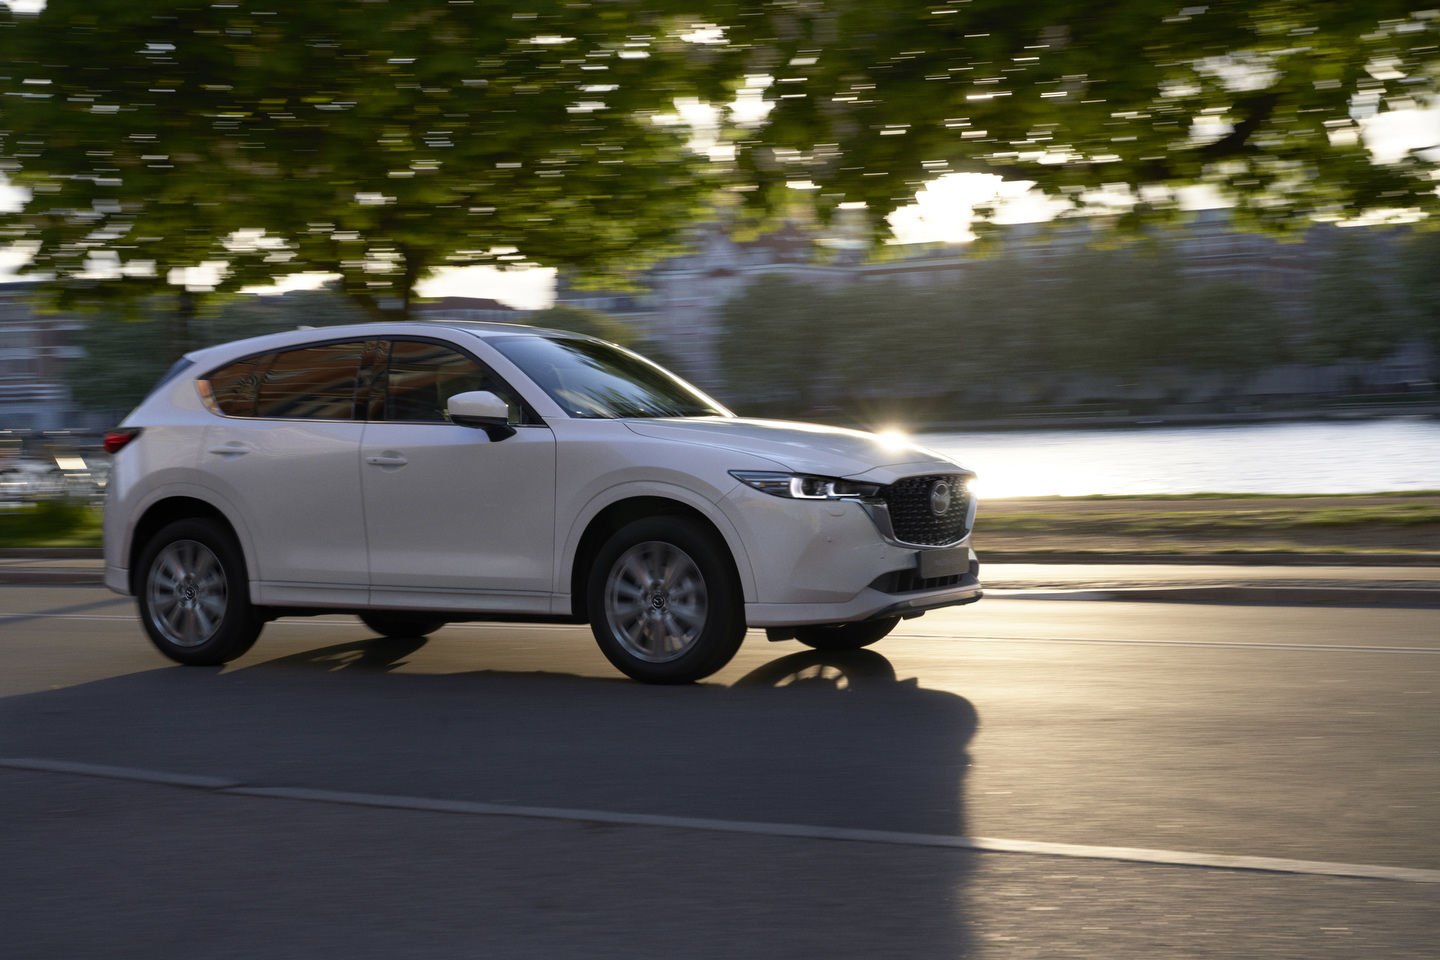 The new 2022 Mazda CX-5 gets a host of improvements